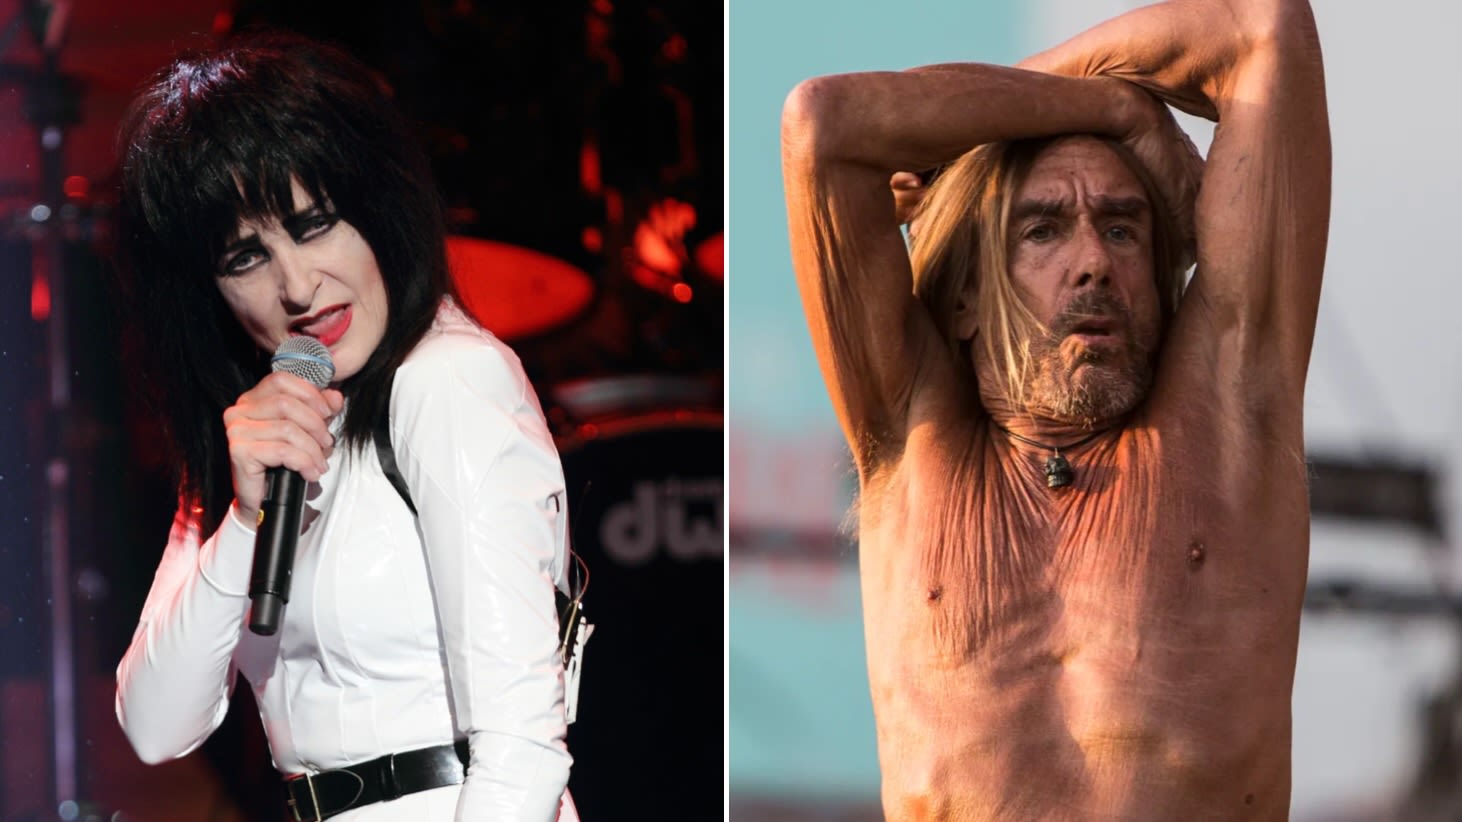 Siouxsie Sioux and Iggy Pop Duet on New Version of “The Passenger”